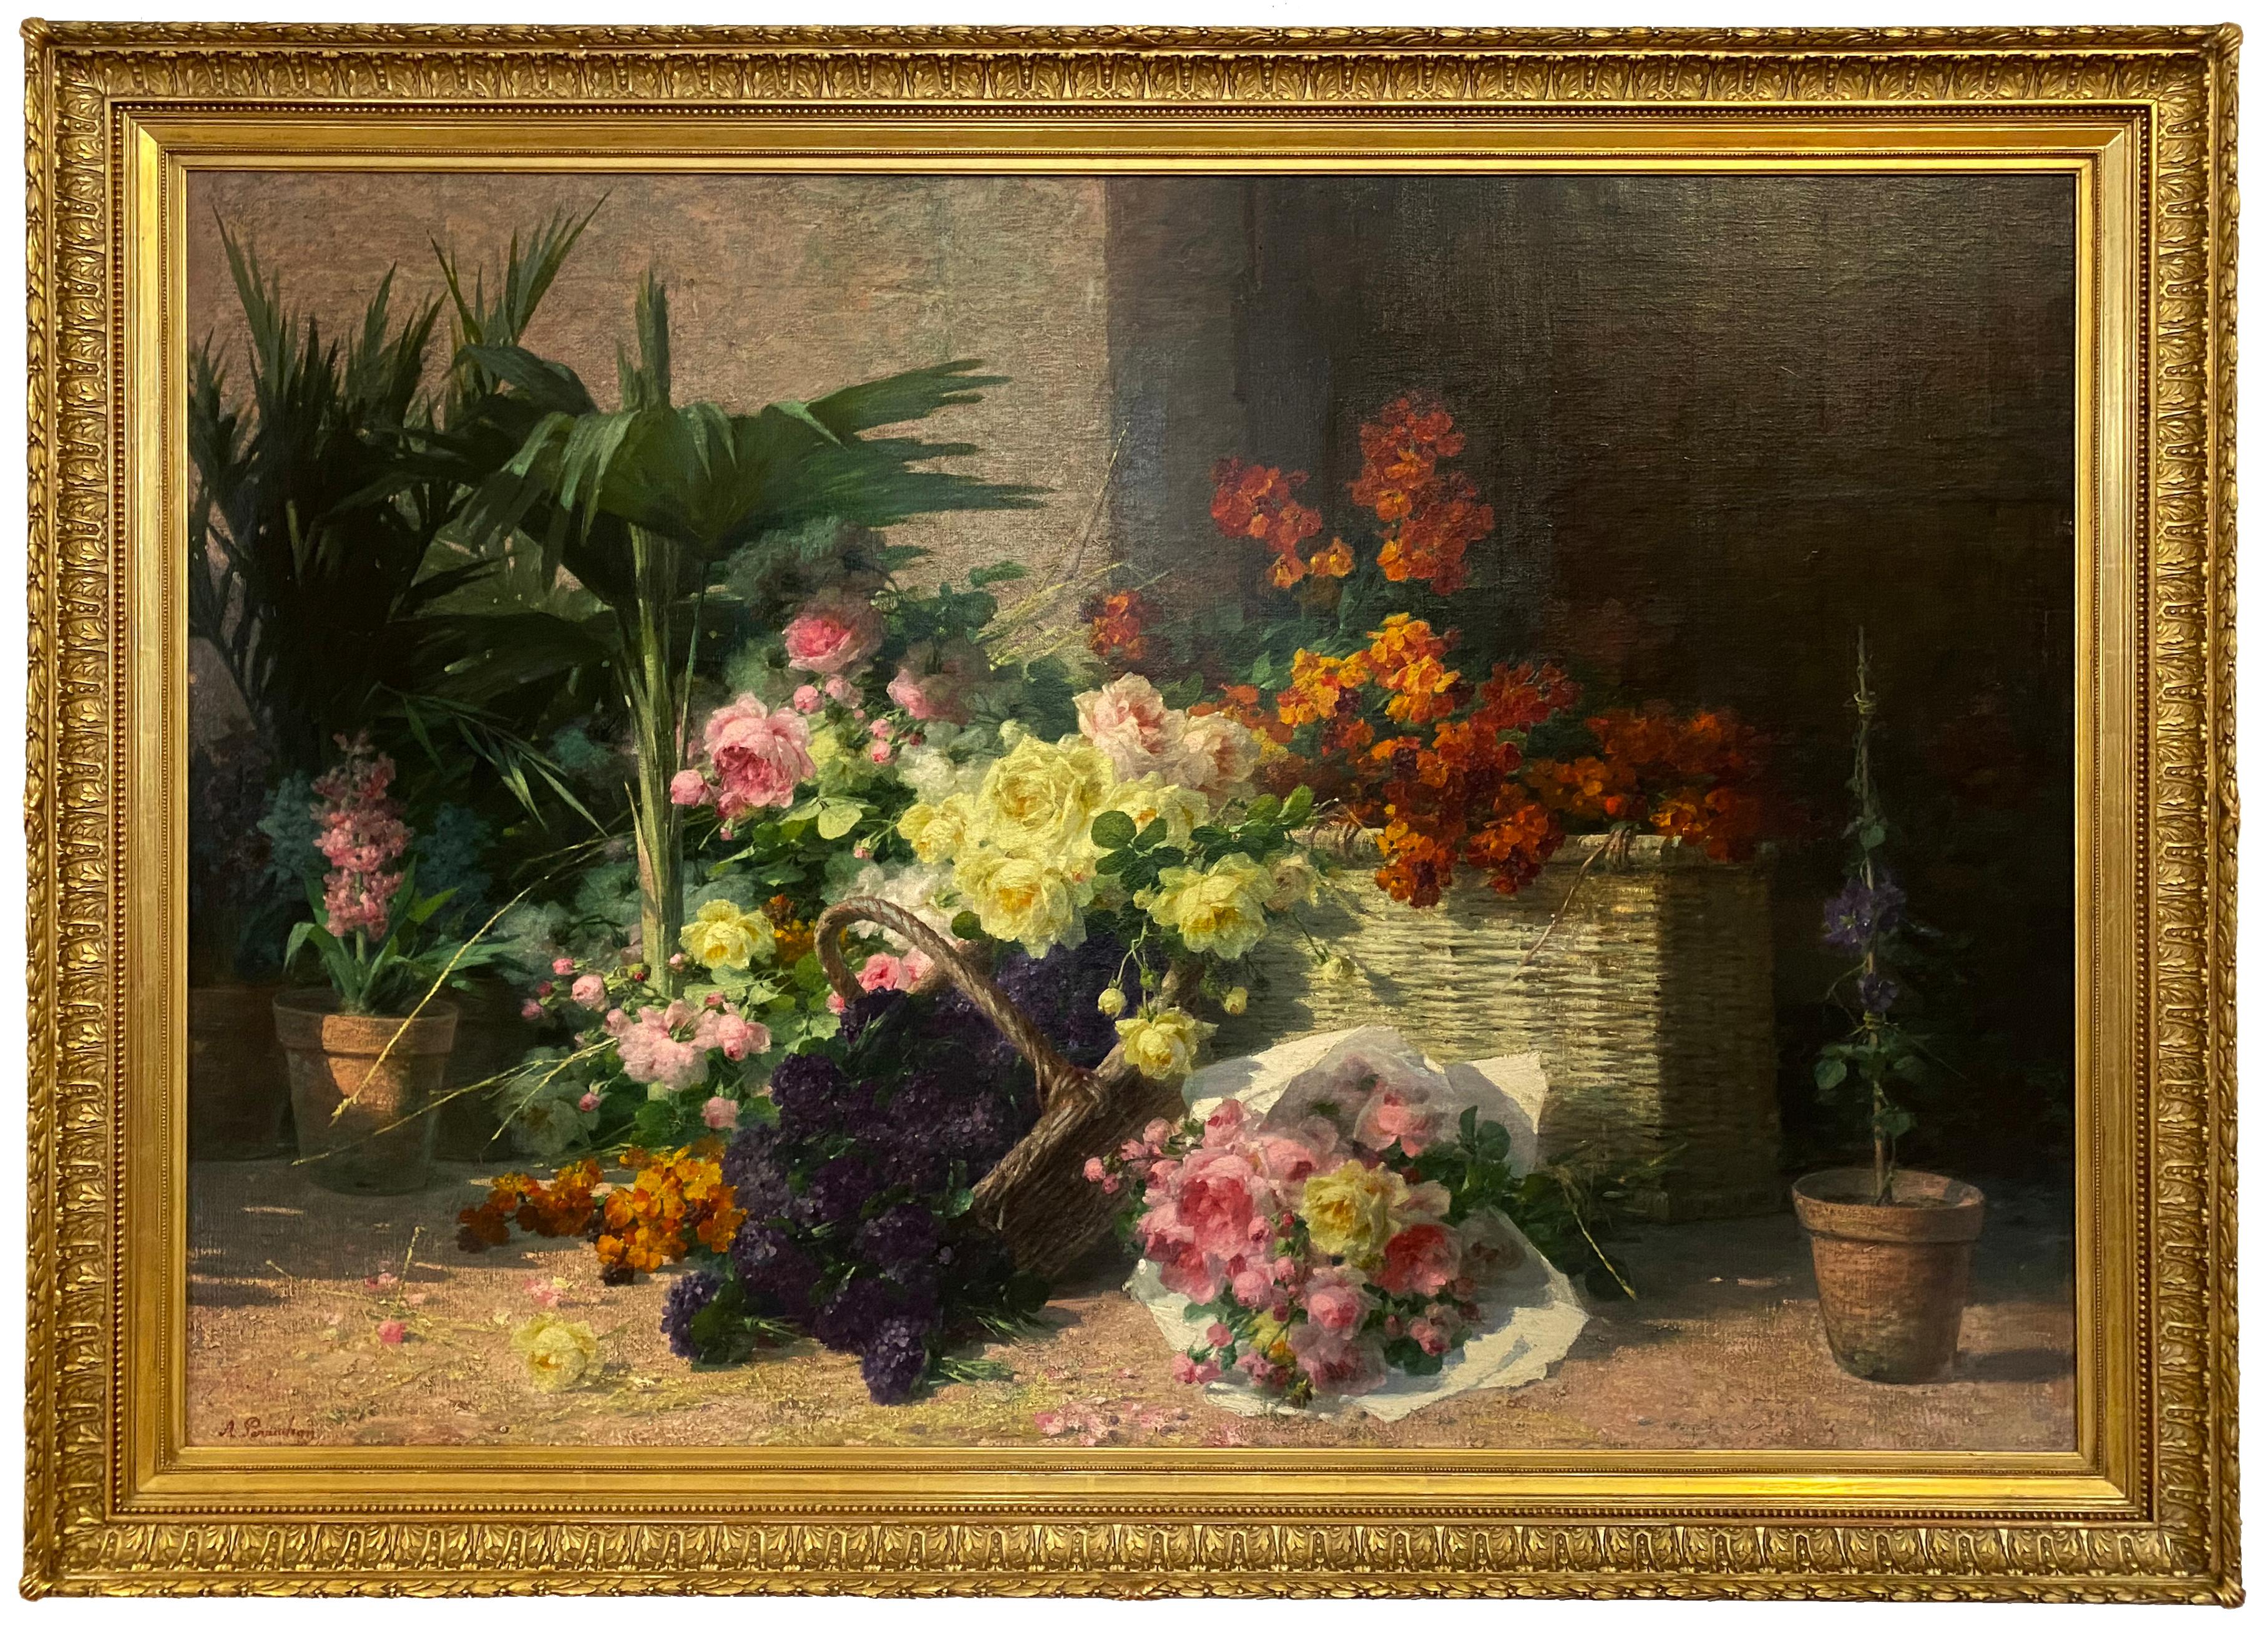 At the Market, Flowers - Painting by André Perrachon